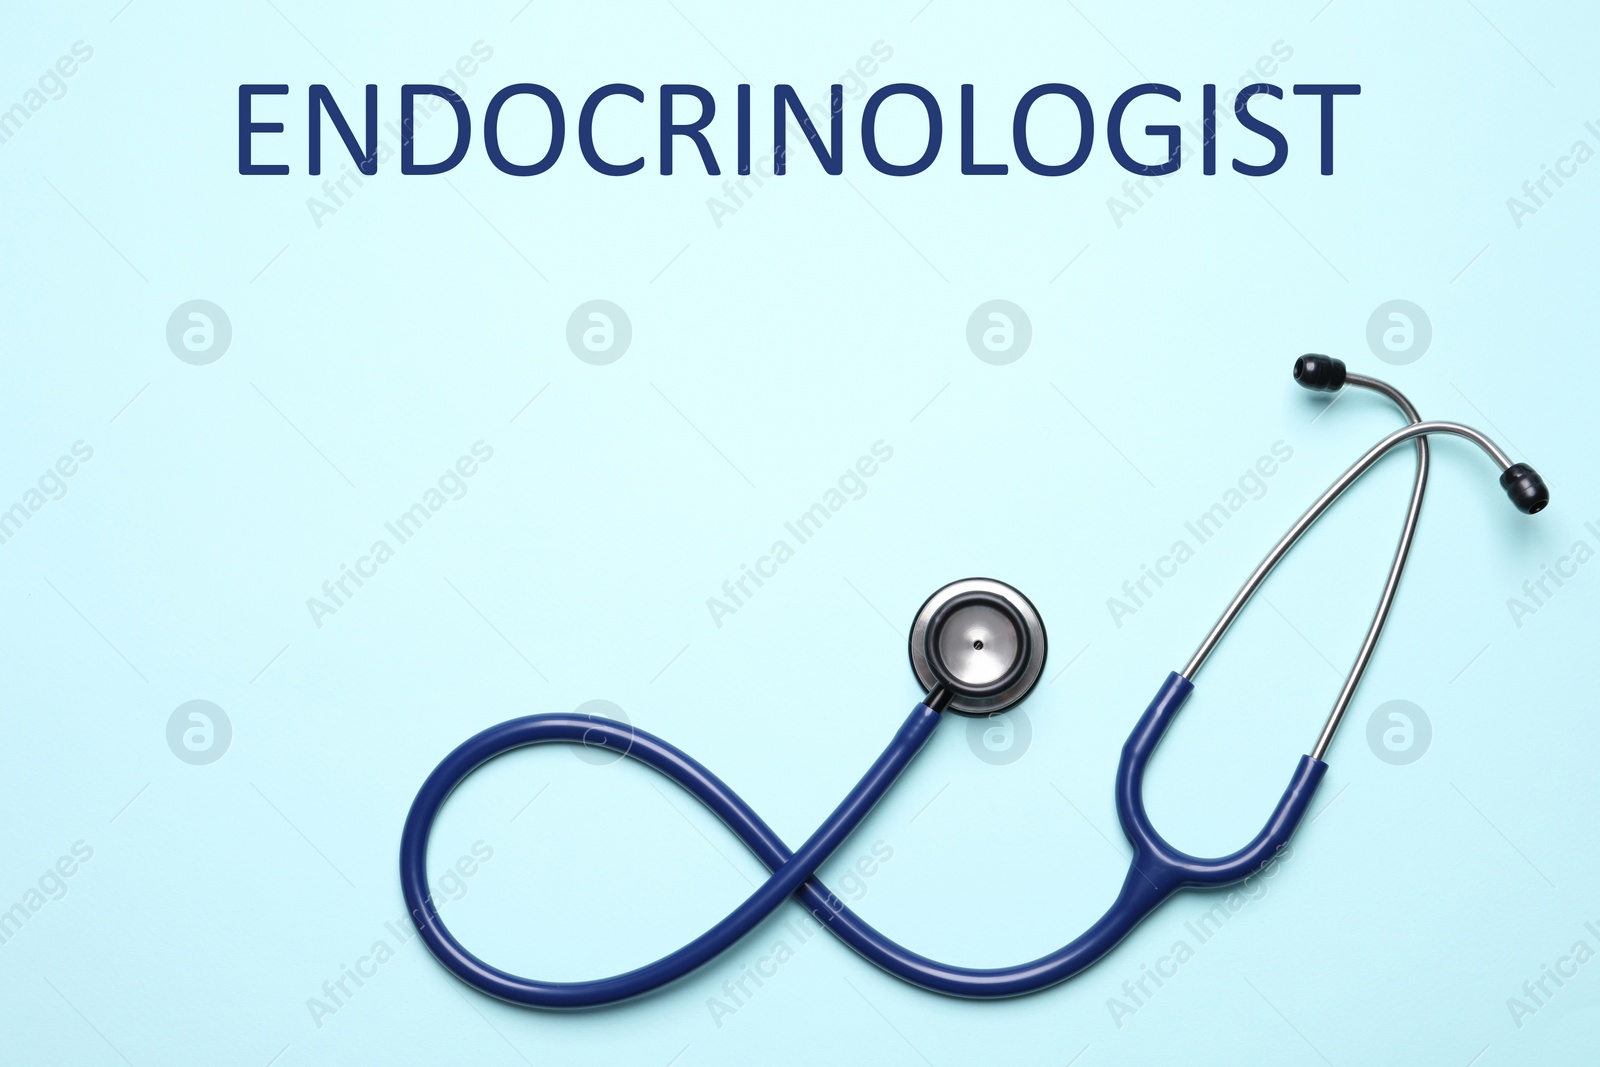 Image of Endocrinologist. Stethoscope on light blue background, top view